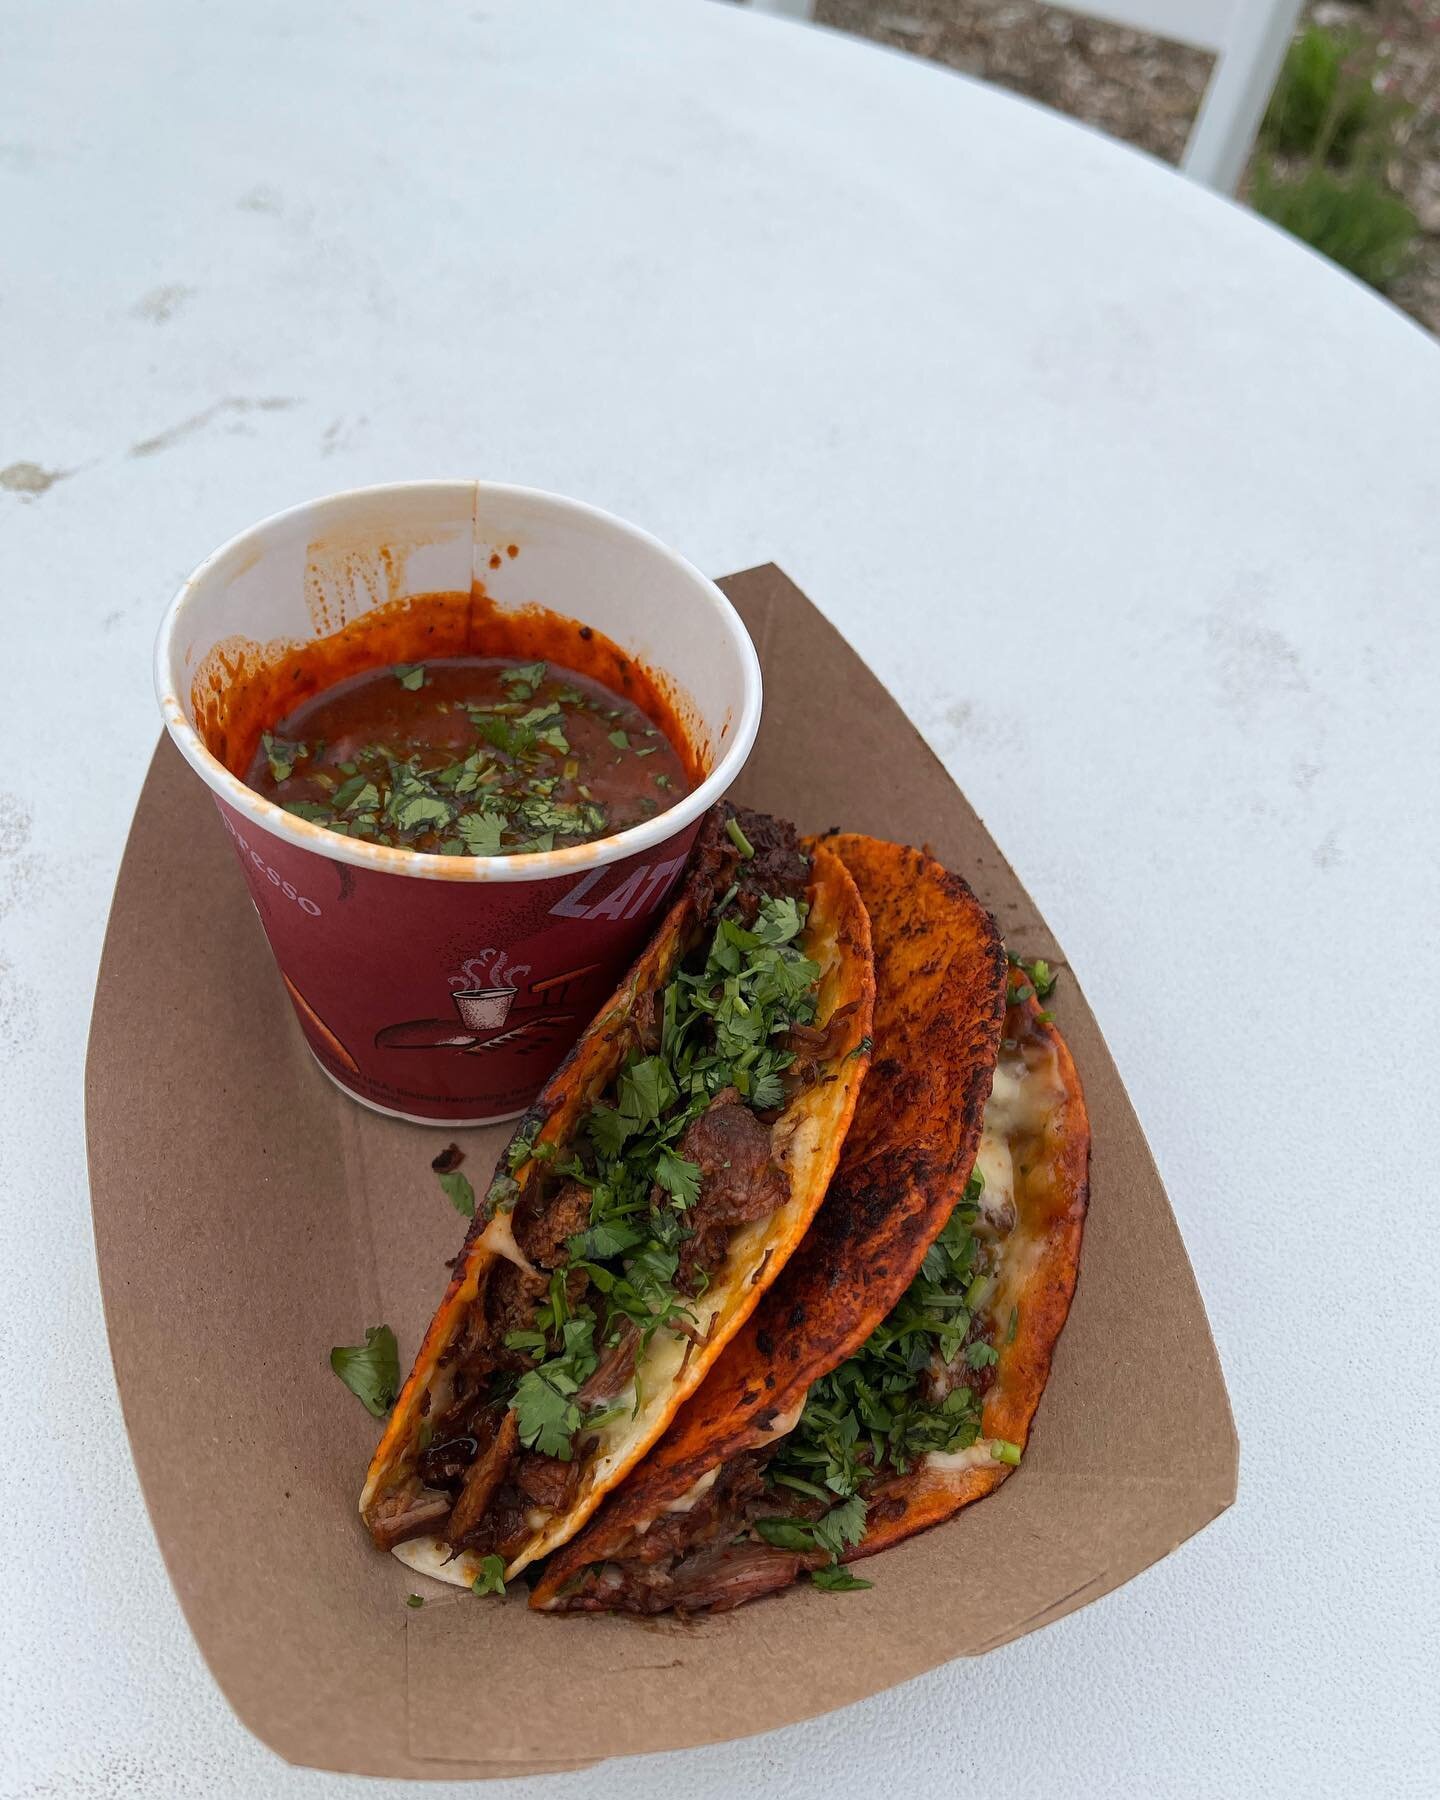 4th of July weekend info! 🎆🇺🇸🎉

Birria making a return to the menu this weekend 🔥🔥 Also veggie taco option is now available! 

We&rsquo;ll be posted up at 300 Water Street Excelsior MN 55331 Thursday-Monday!!🇺🇸🤙🏼

Check out the menus for th